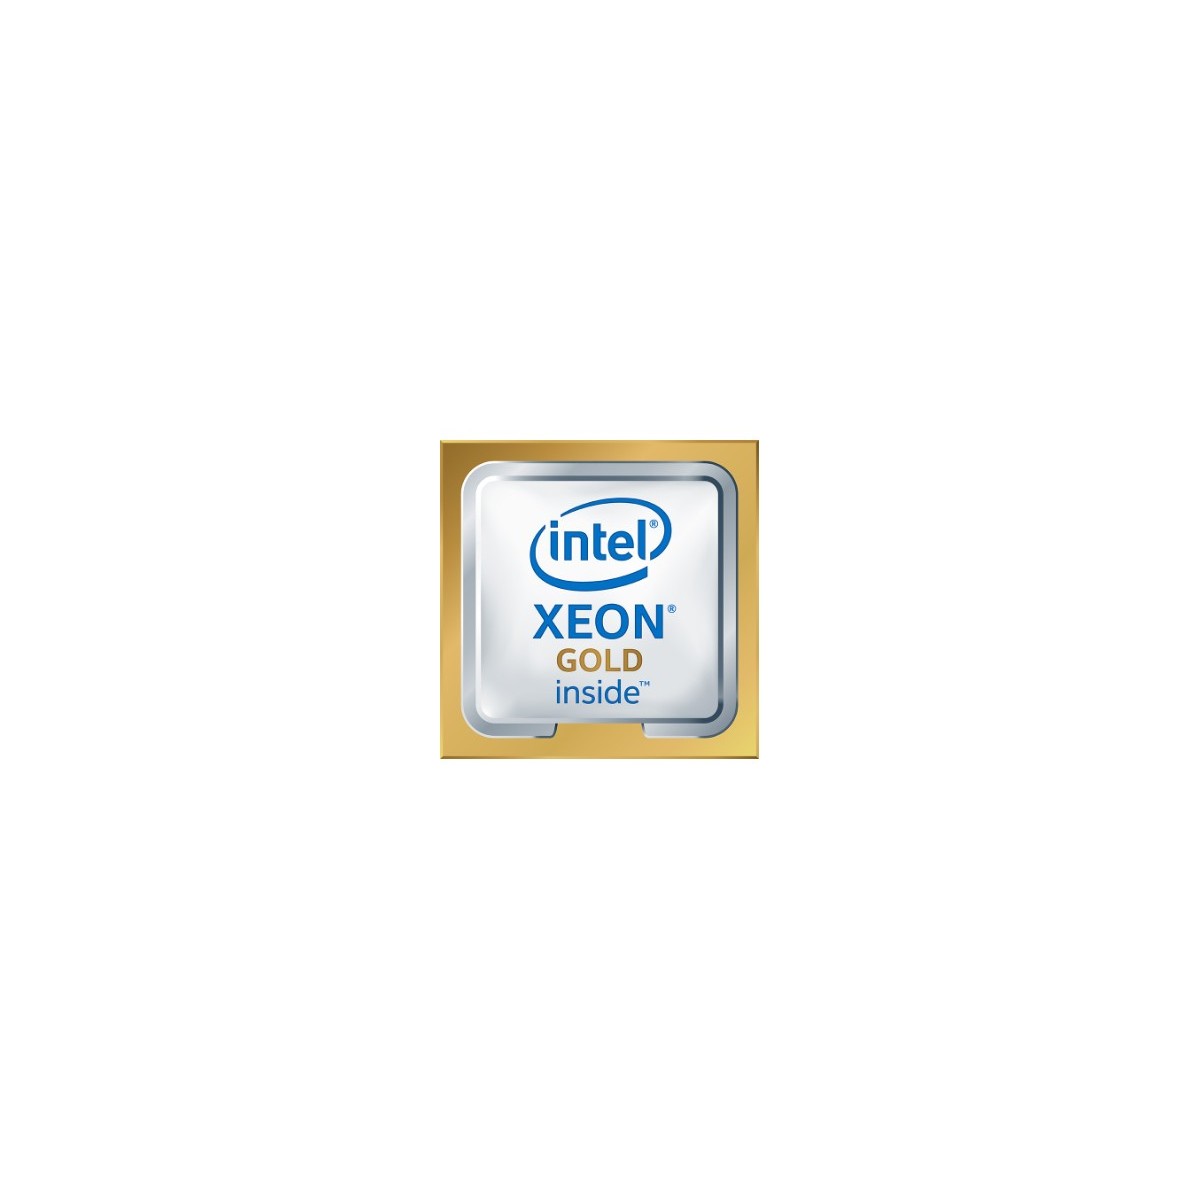 HPE Processor Intel Xeon-Gold 6334 3.6GHz 8-core 165W for - Xeon Gold - 3.6 GHz